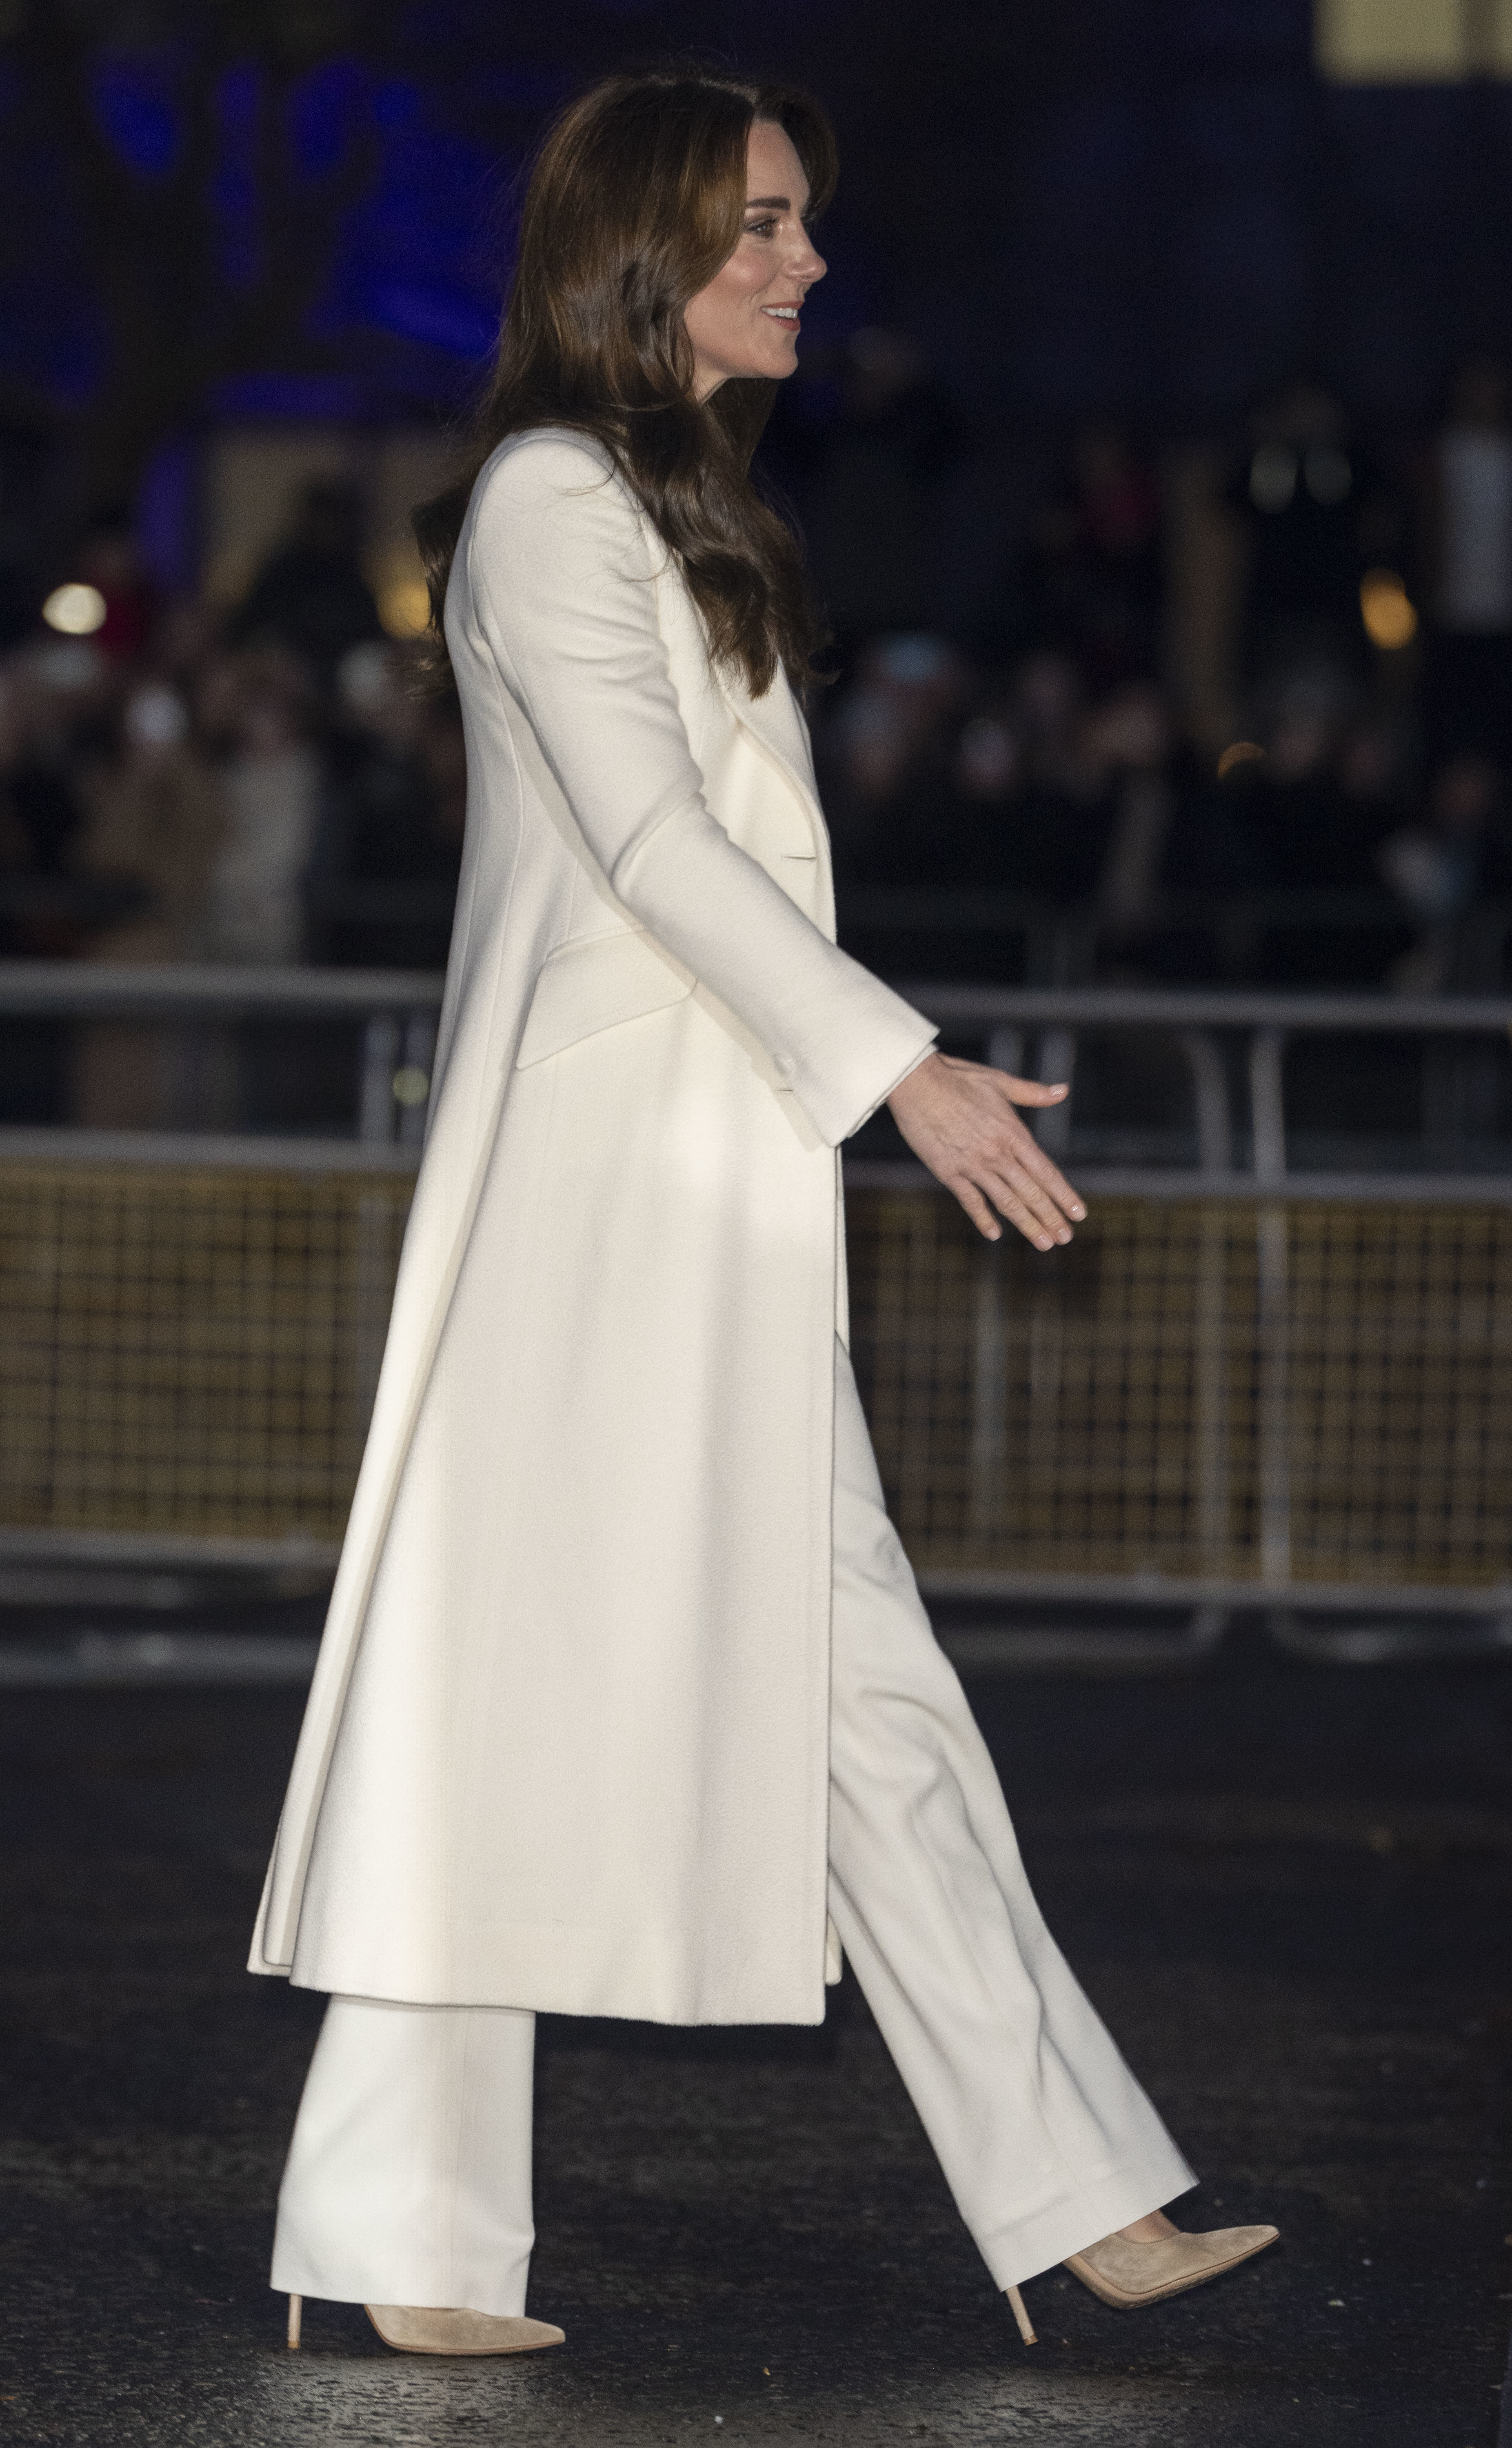 Kate Middleton in a long coat and trousers walking outside at night